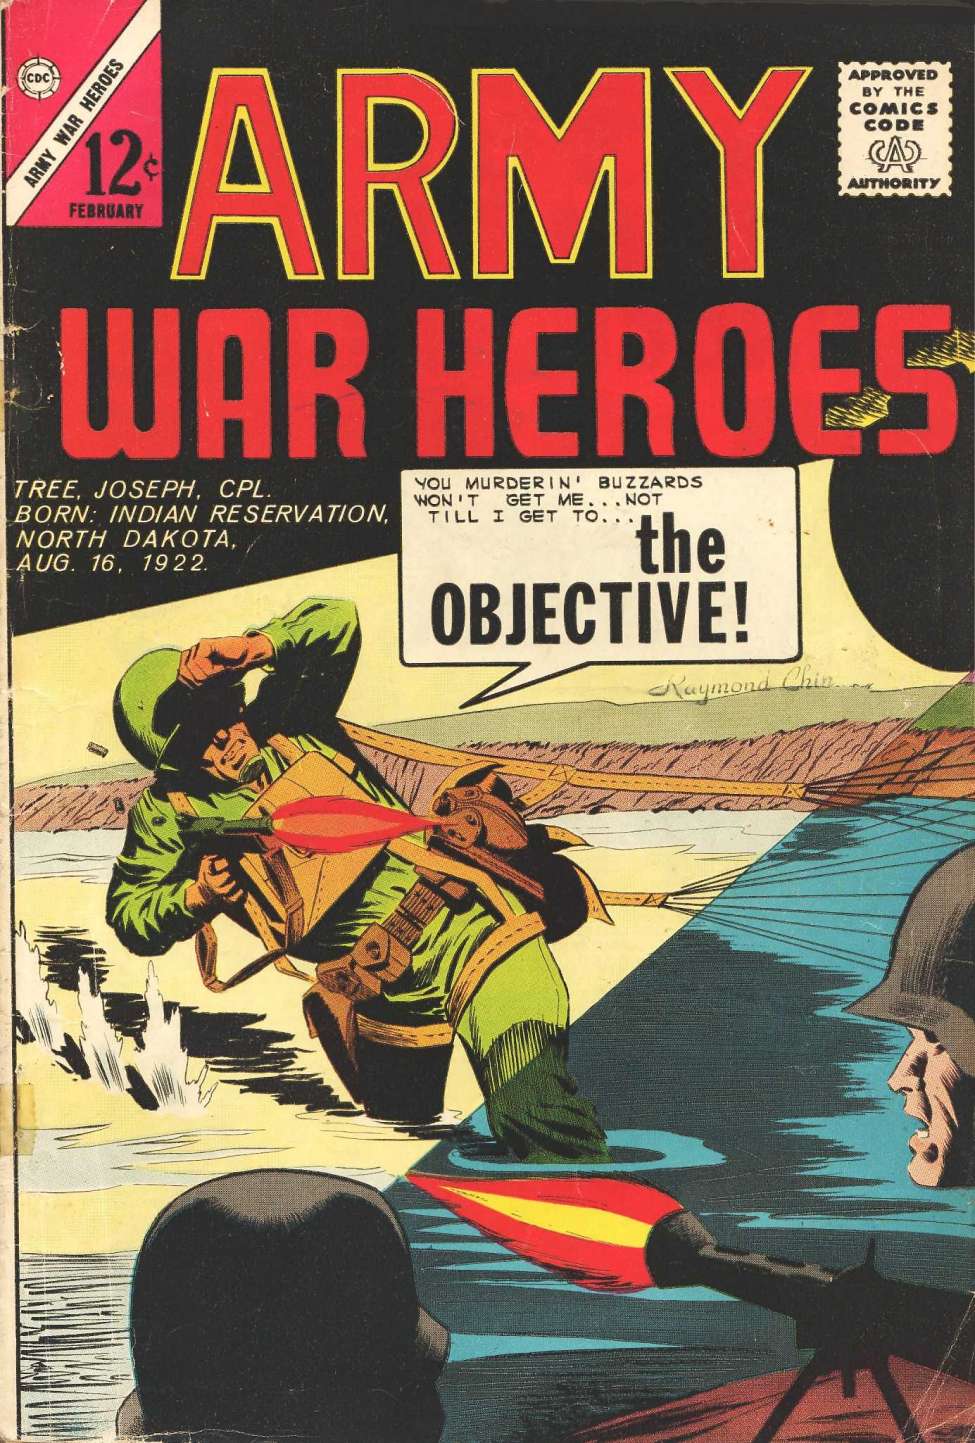 Book Cover For Army War Heroes 2